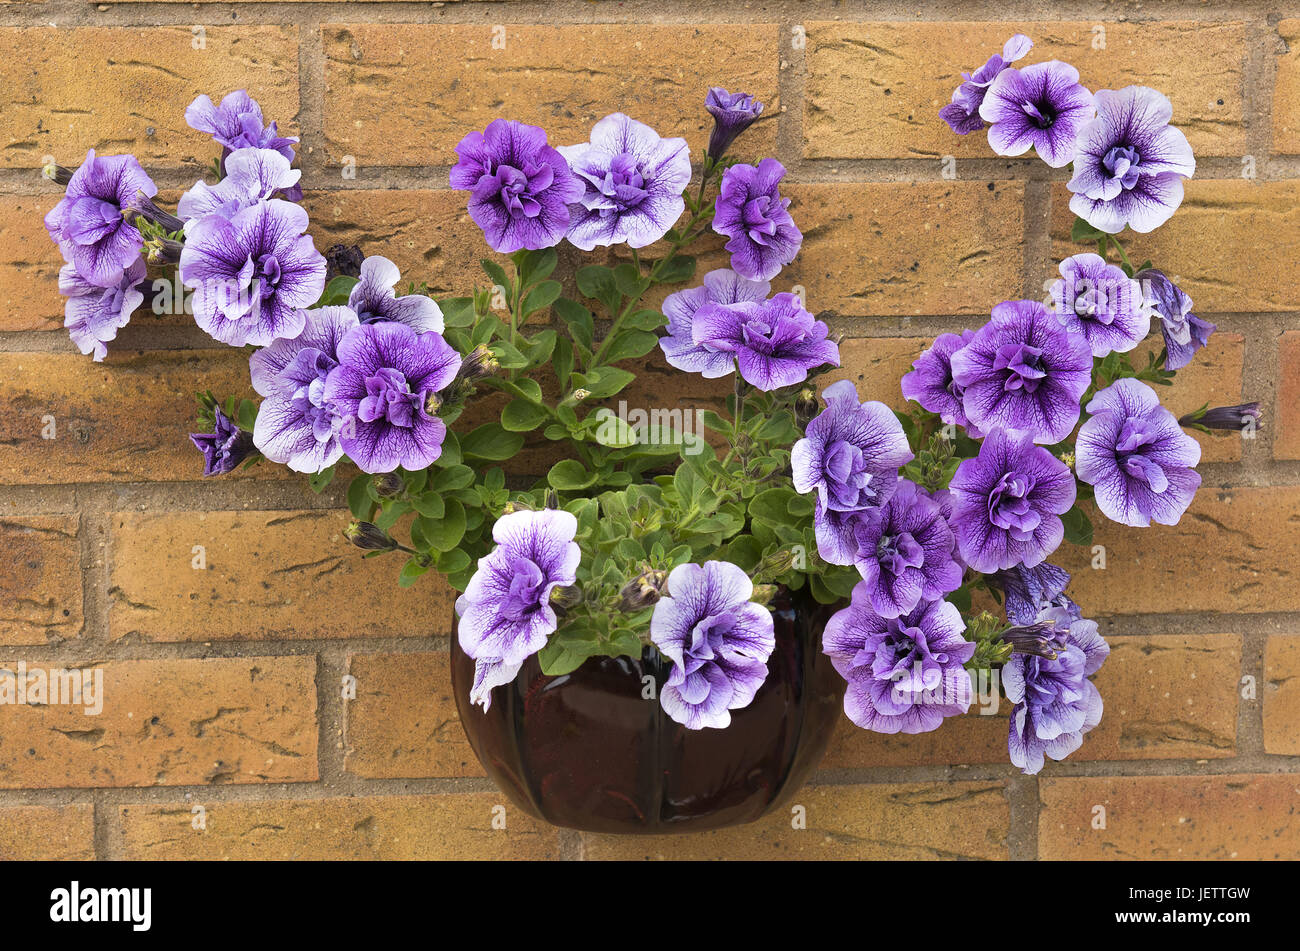 Beautiful summer flowering purple surfina petunia plants in a wall mounted container. Stock Photo